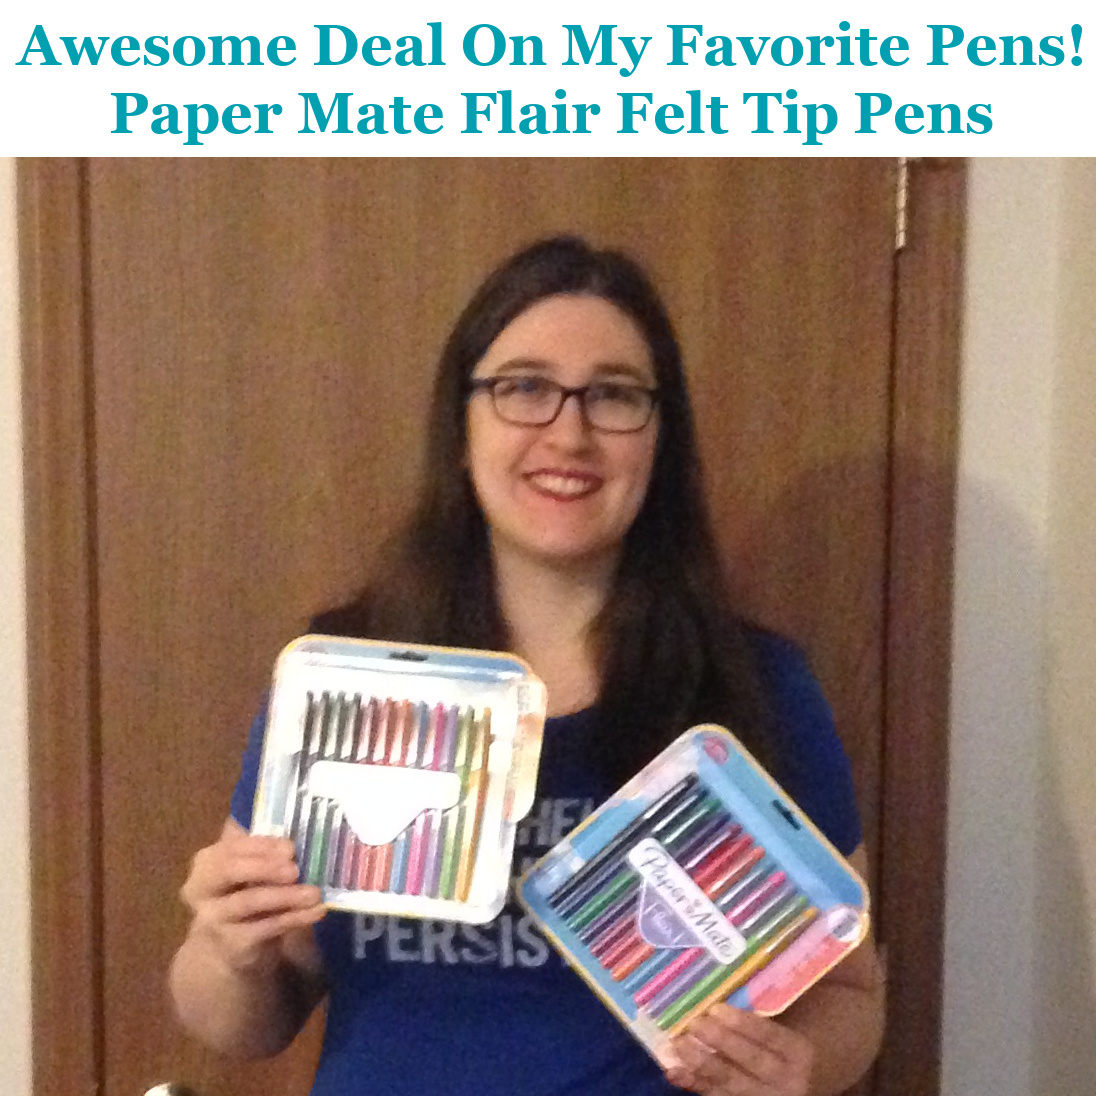 Taylor holding my favorite pens, the Paper Mate flairs